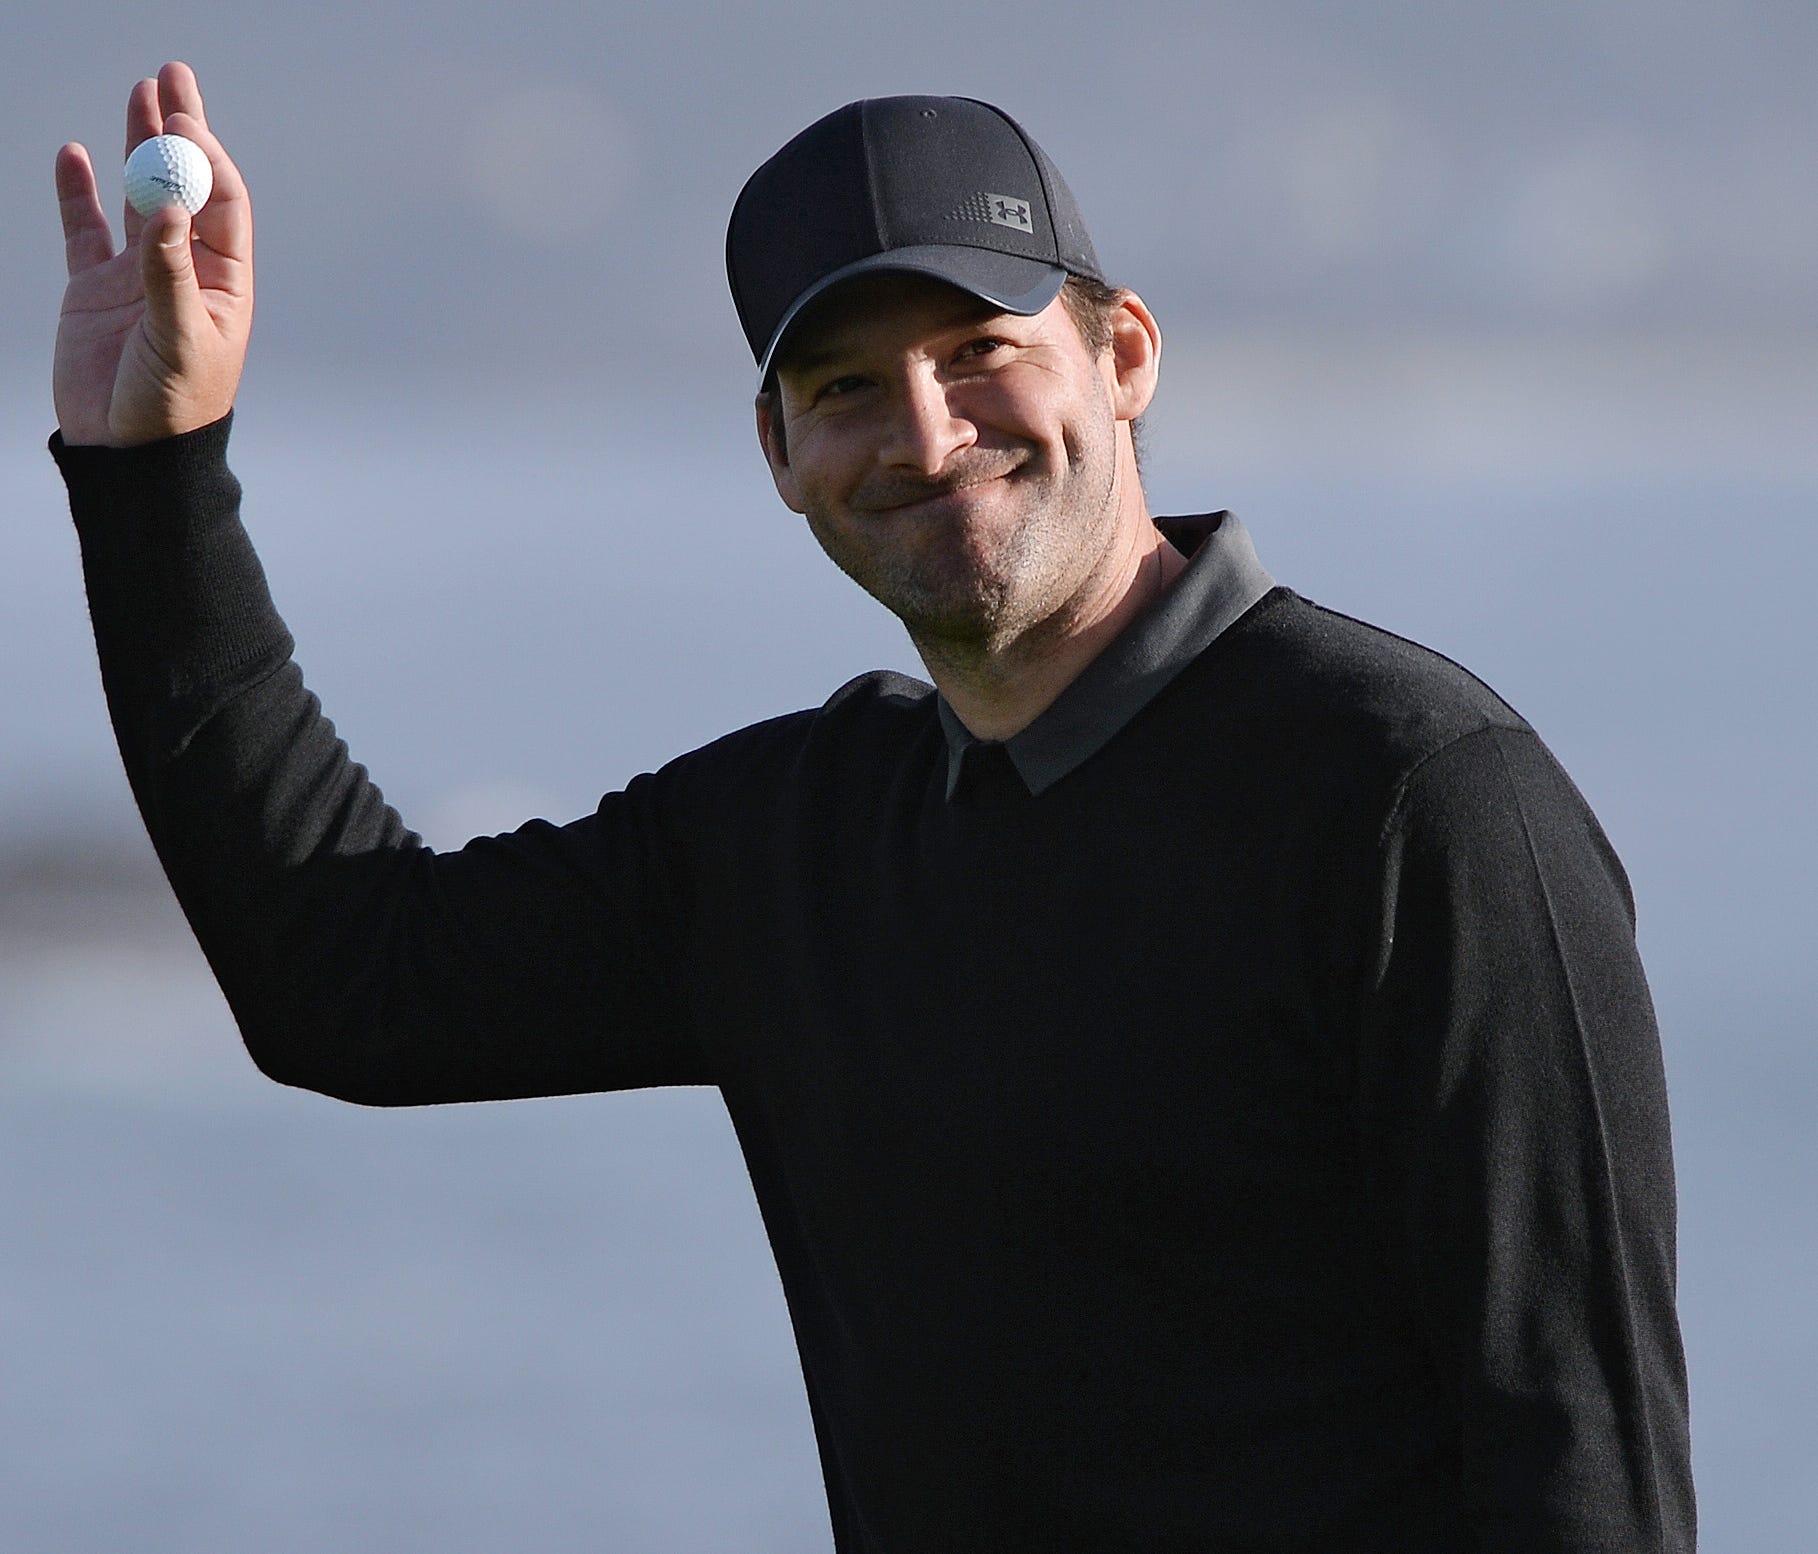 Tony Romo acknowledges the crowd on the 18th green at the 2018 AT&T Pebble Beach Pro-Am golf tournament at Pebble Beach Golf Links.